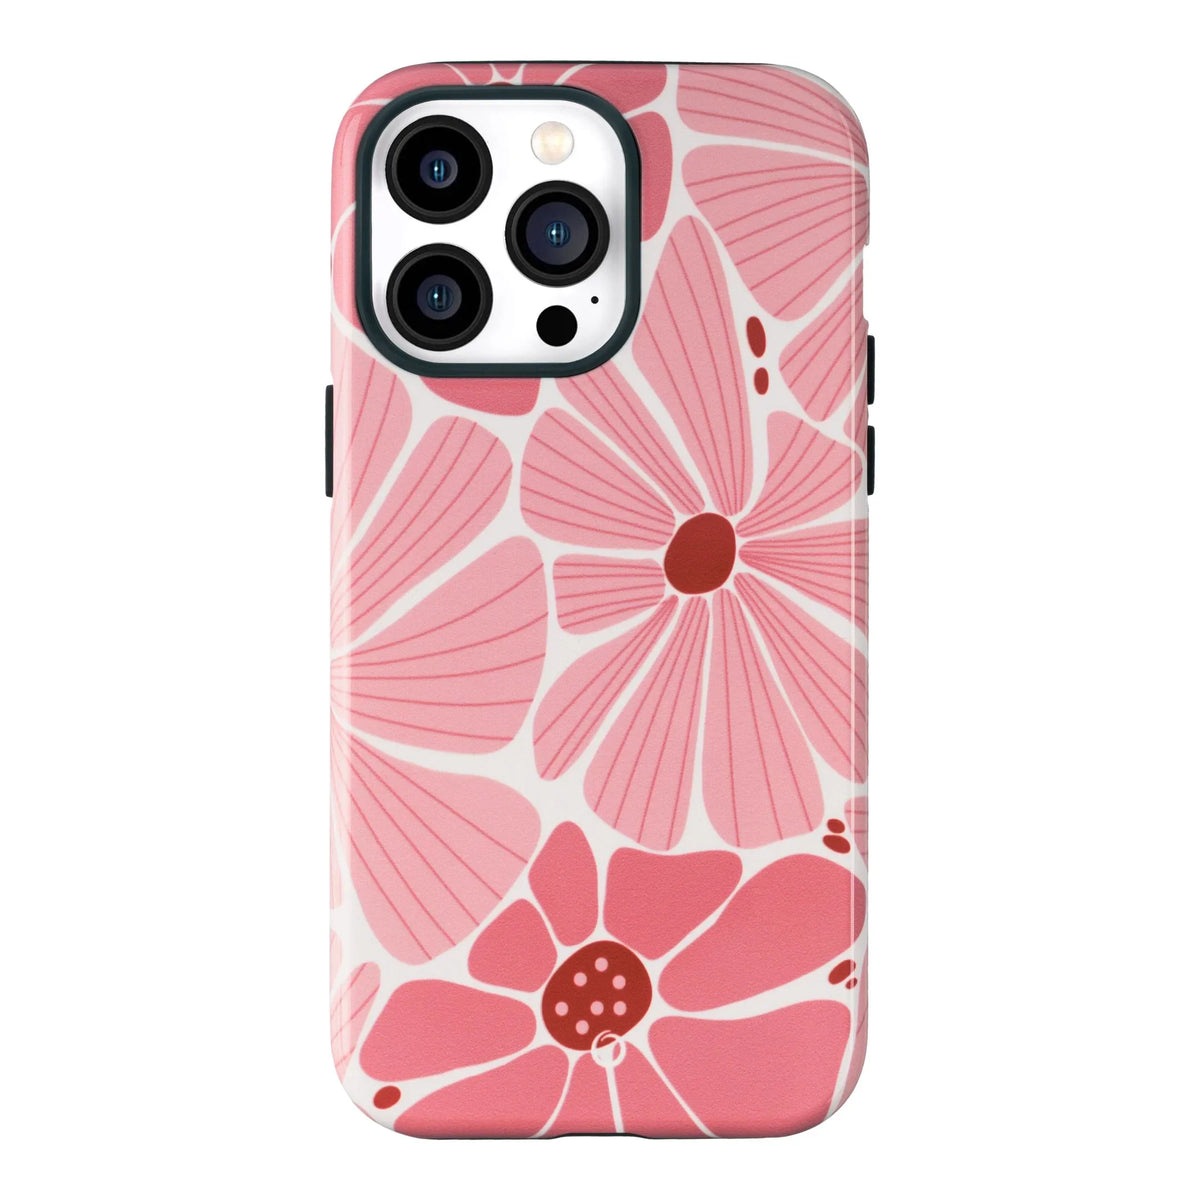 Floral Blast iPhone Case - Select a Device